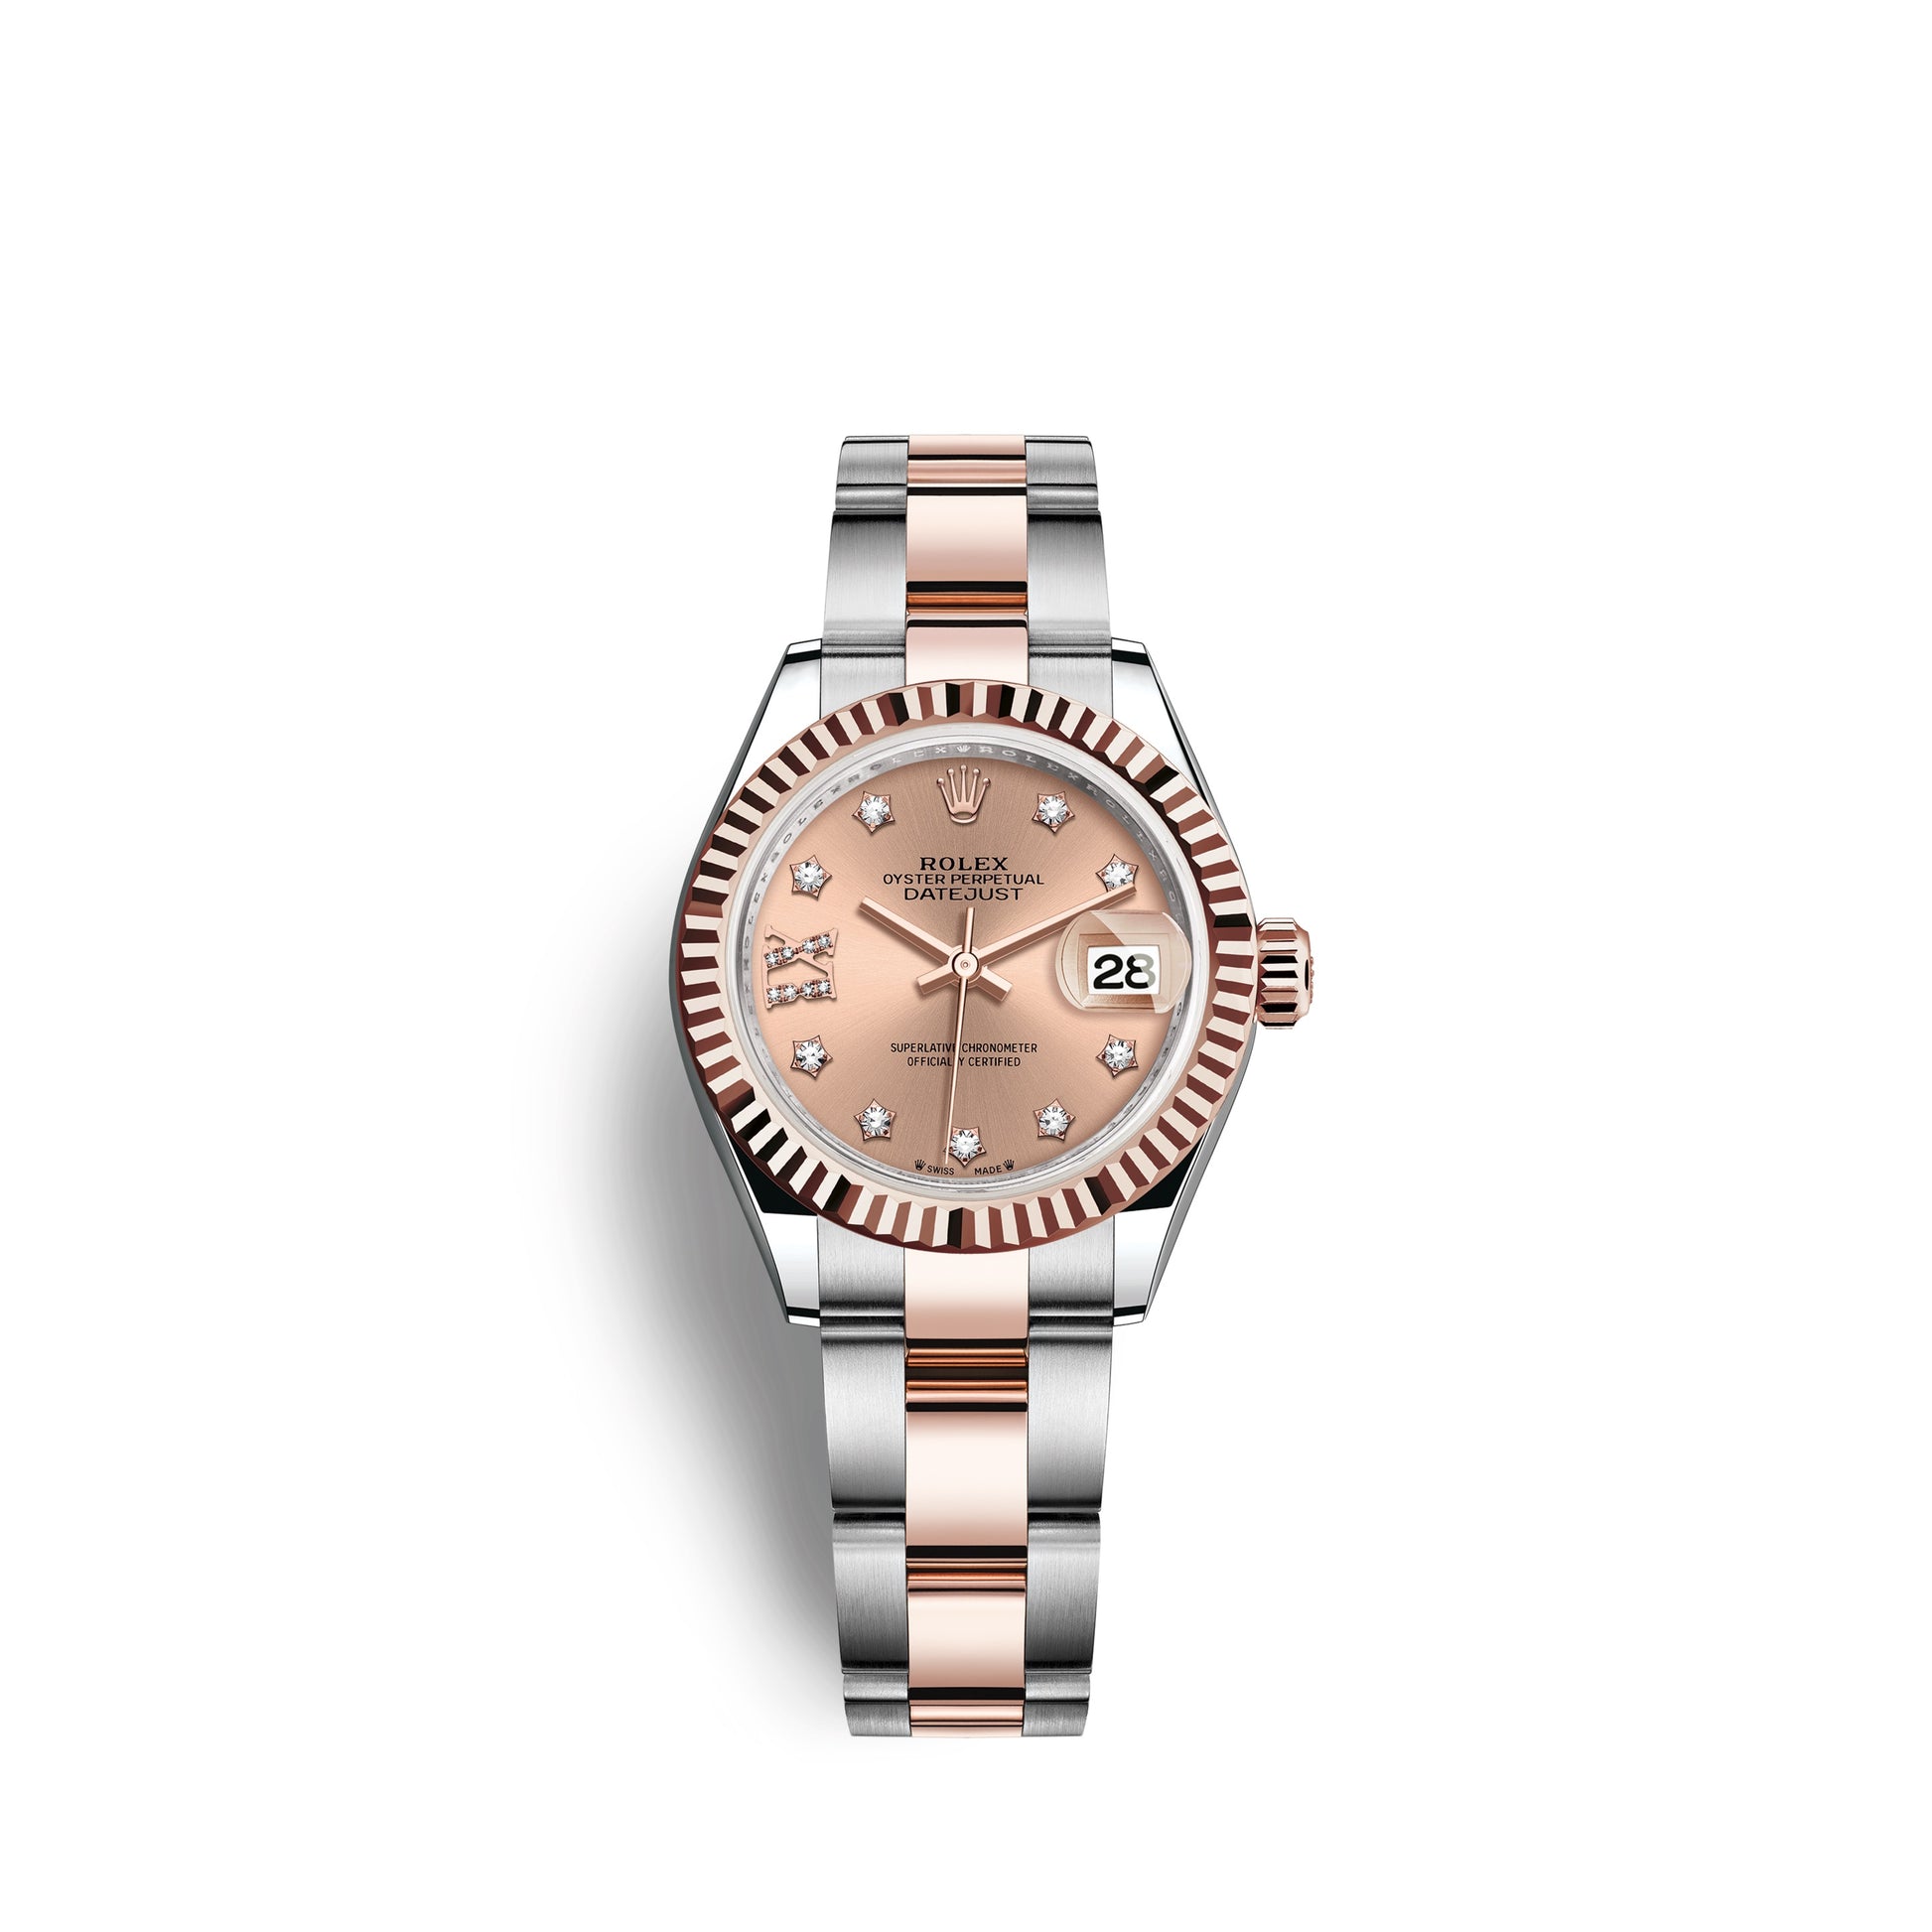 Rolex Lady-Datejust 28, Oystersteel and 18k Everose Gold, Ref# 279171-0028